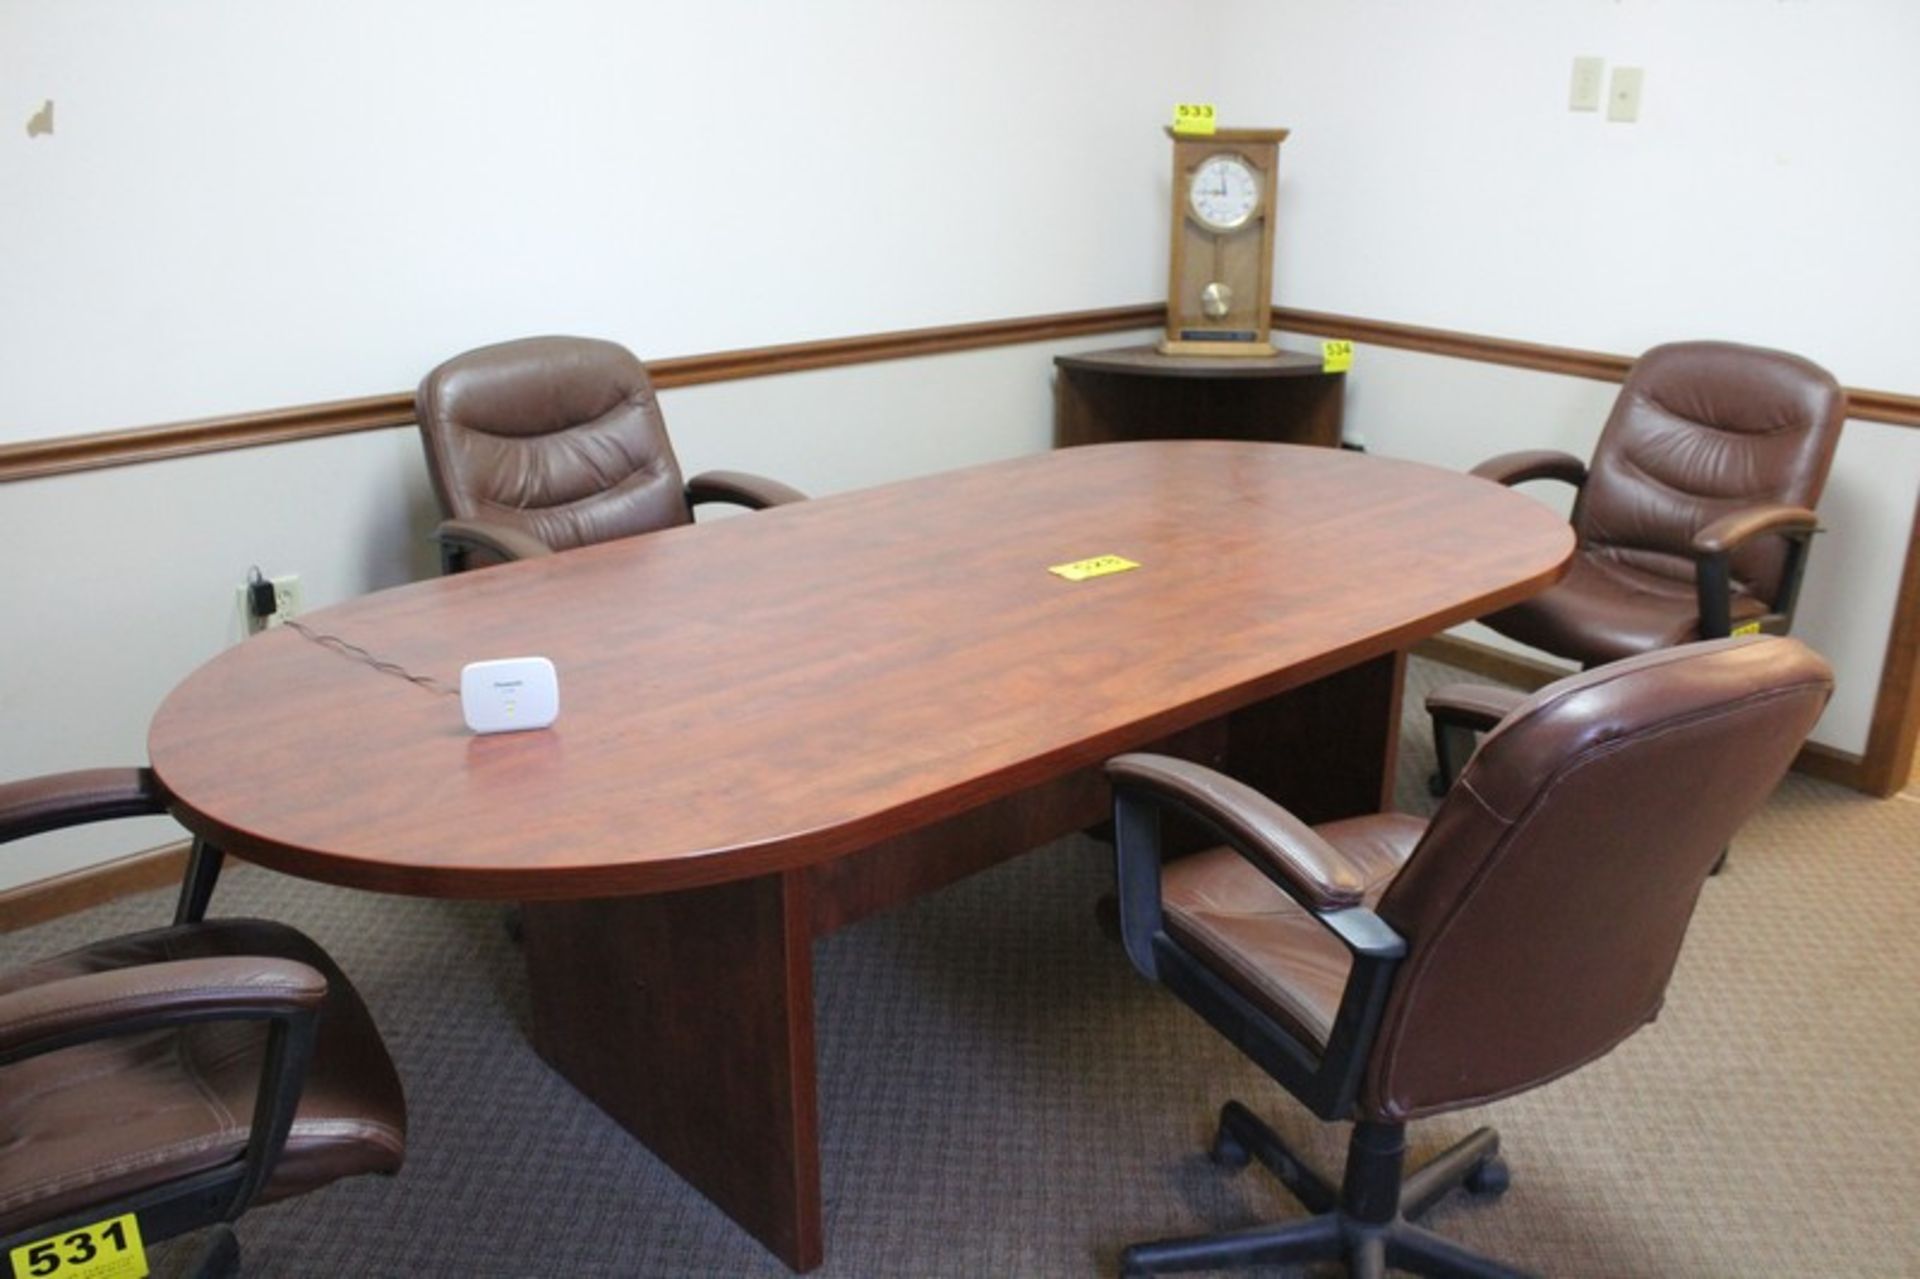 CONFERENCE TABLE 96" X 43" X 29" HIGH